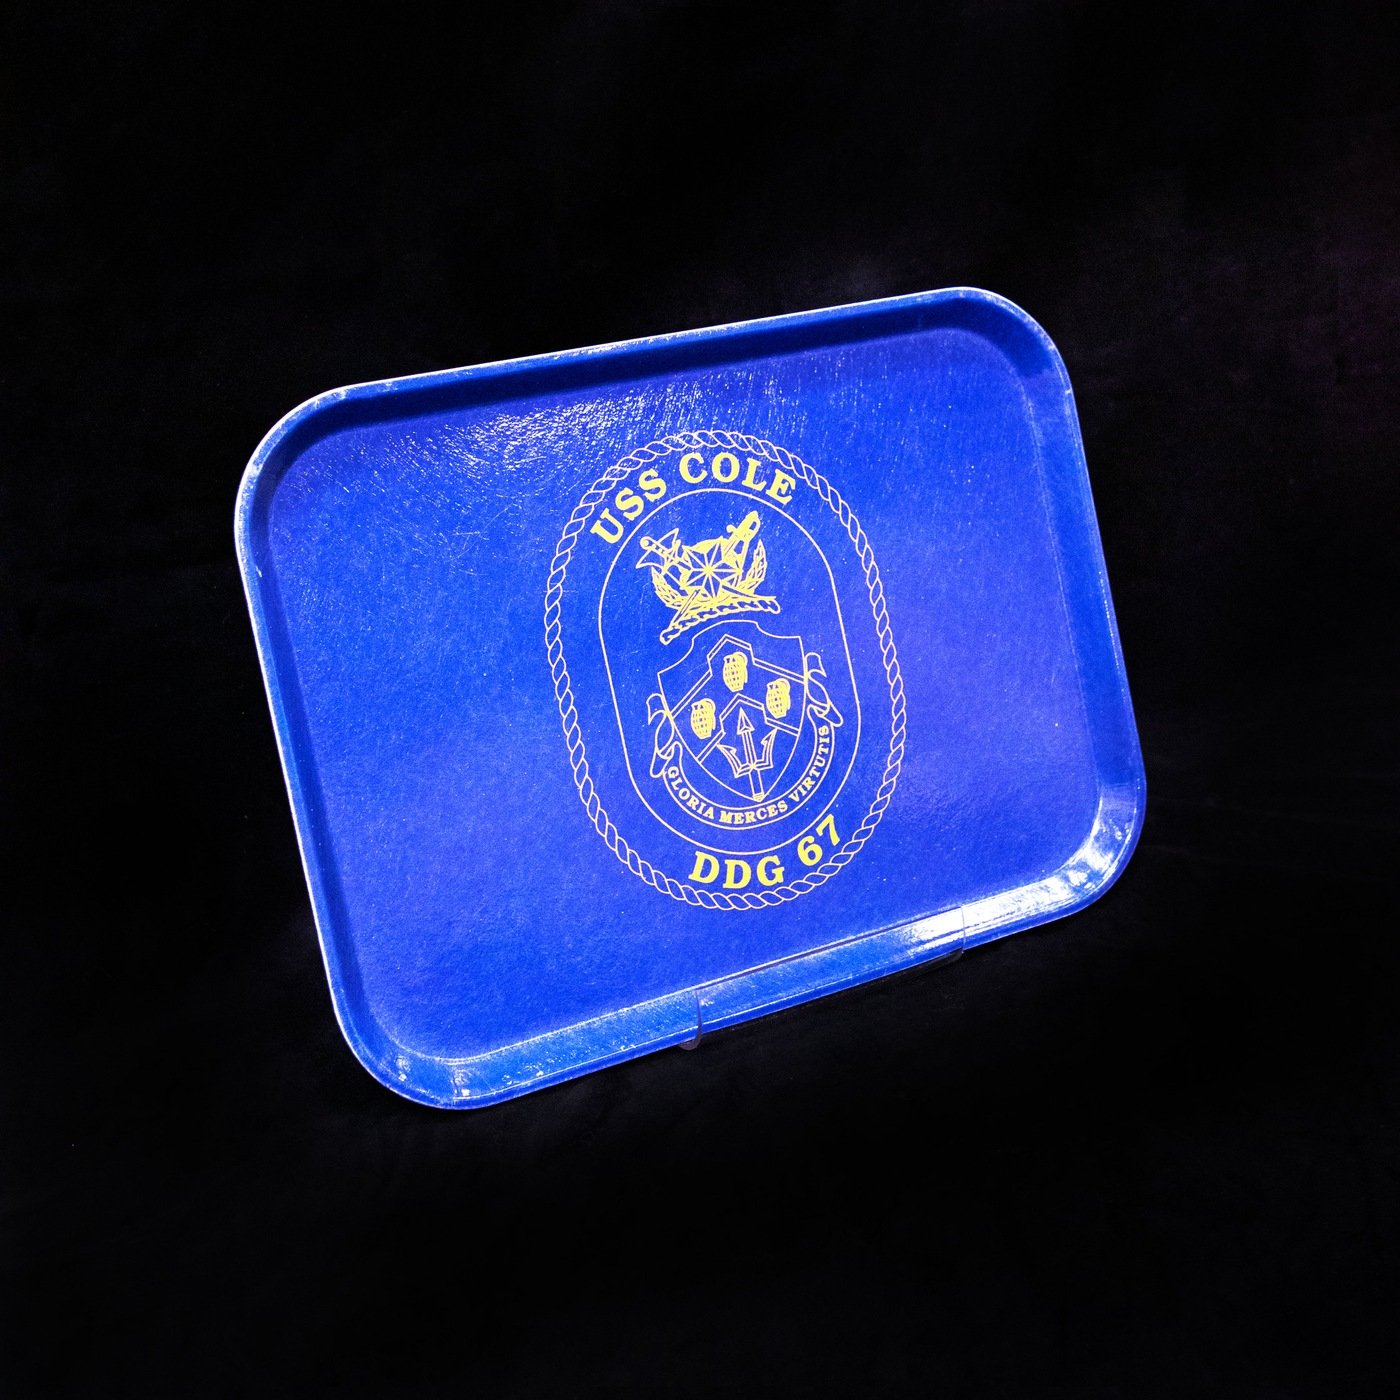 The FBI’s October Artifact of the Month is a blue tray recovered from the galley of the USS Cole.